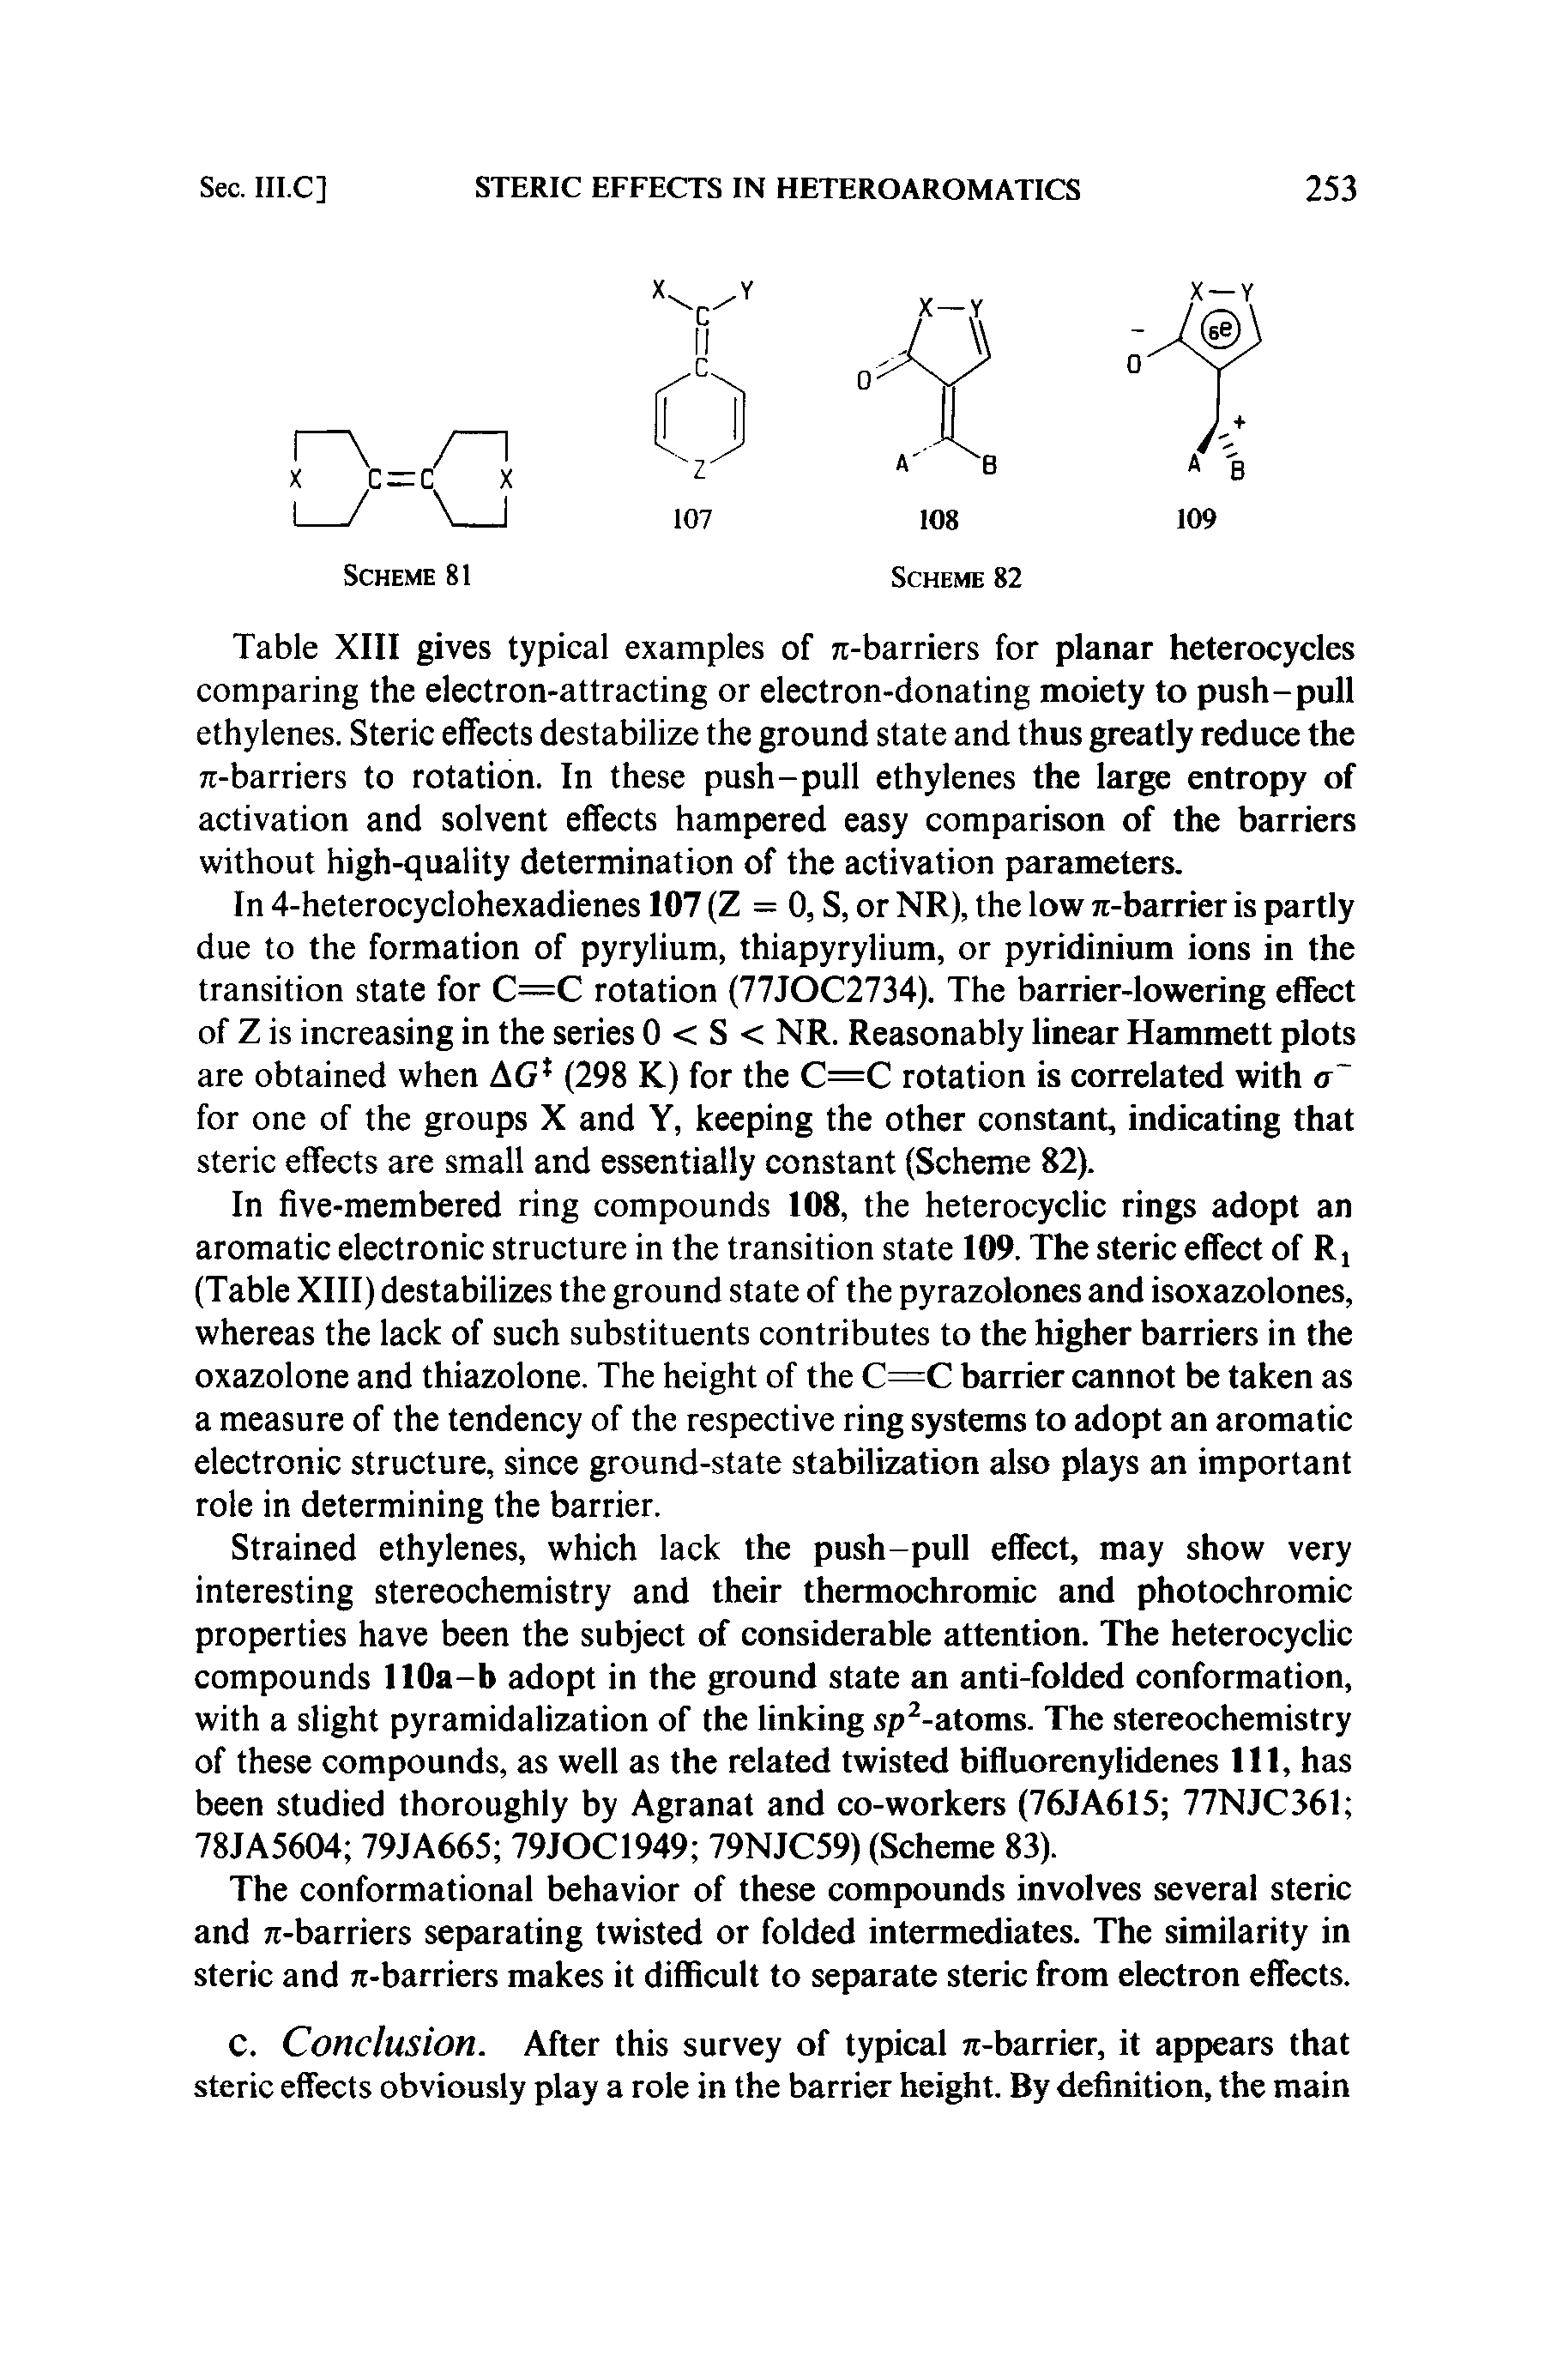 Table XIII gives typical examples of 7t-barriers for planar heterocycles comparing the electron-attracting or electron-donating moiety to push-pull ethylenes. Steric effects destabilize the ground state and thus greatly reduce the 71-barriers to rotation. In these push-pull ethylenes the large entropy of activation and solvent effects hampered easy comparison of the barriers without high-quality determination of the activation parameters.